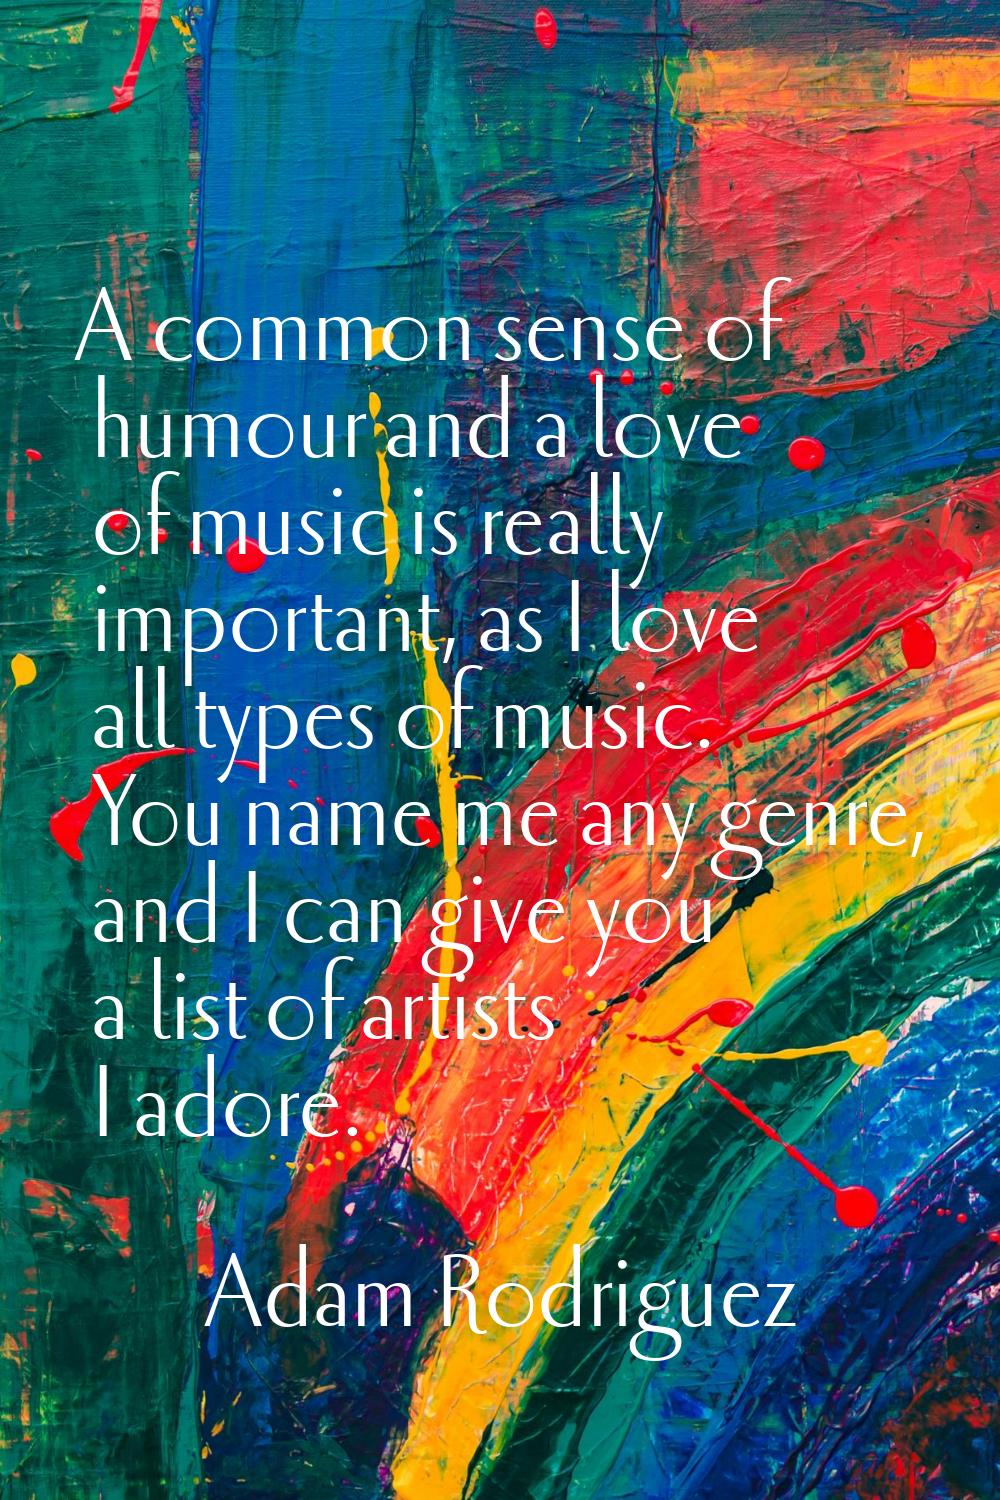 A common sense of humour and a love of music is really important, as I love all types of music. You